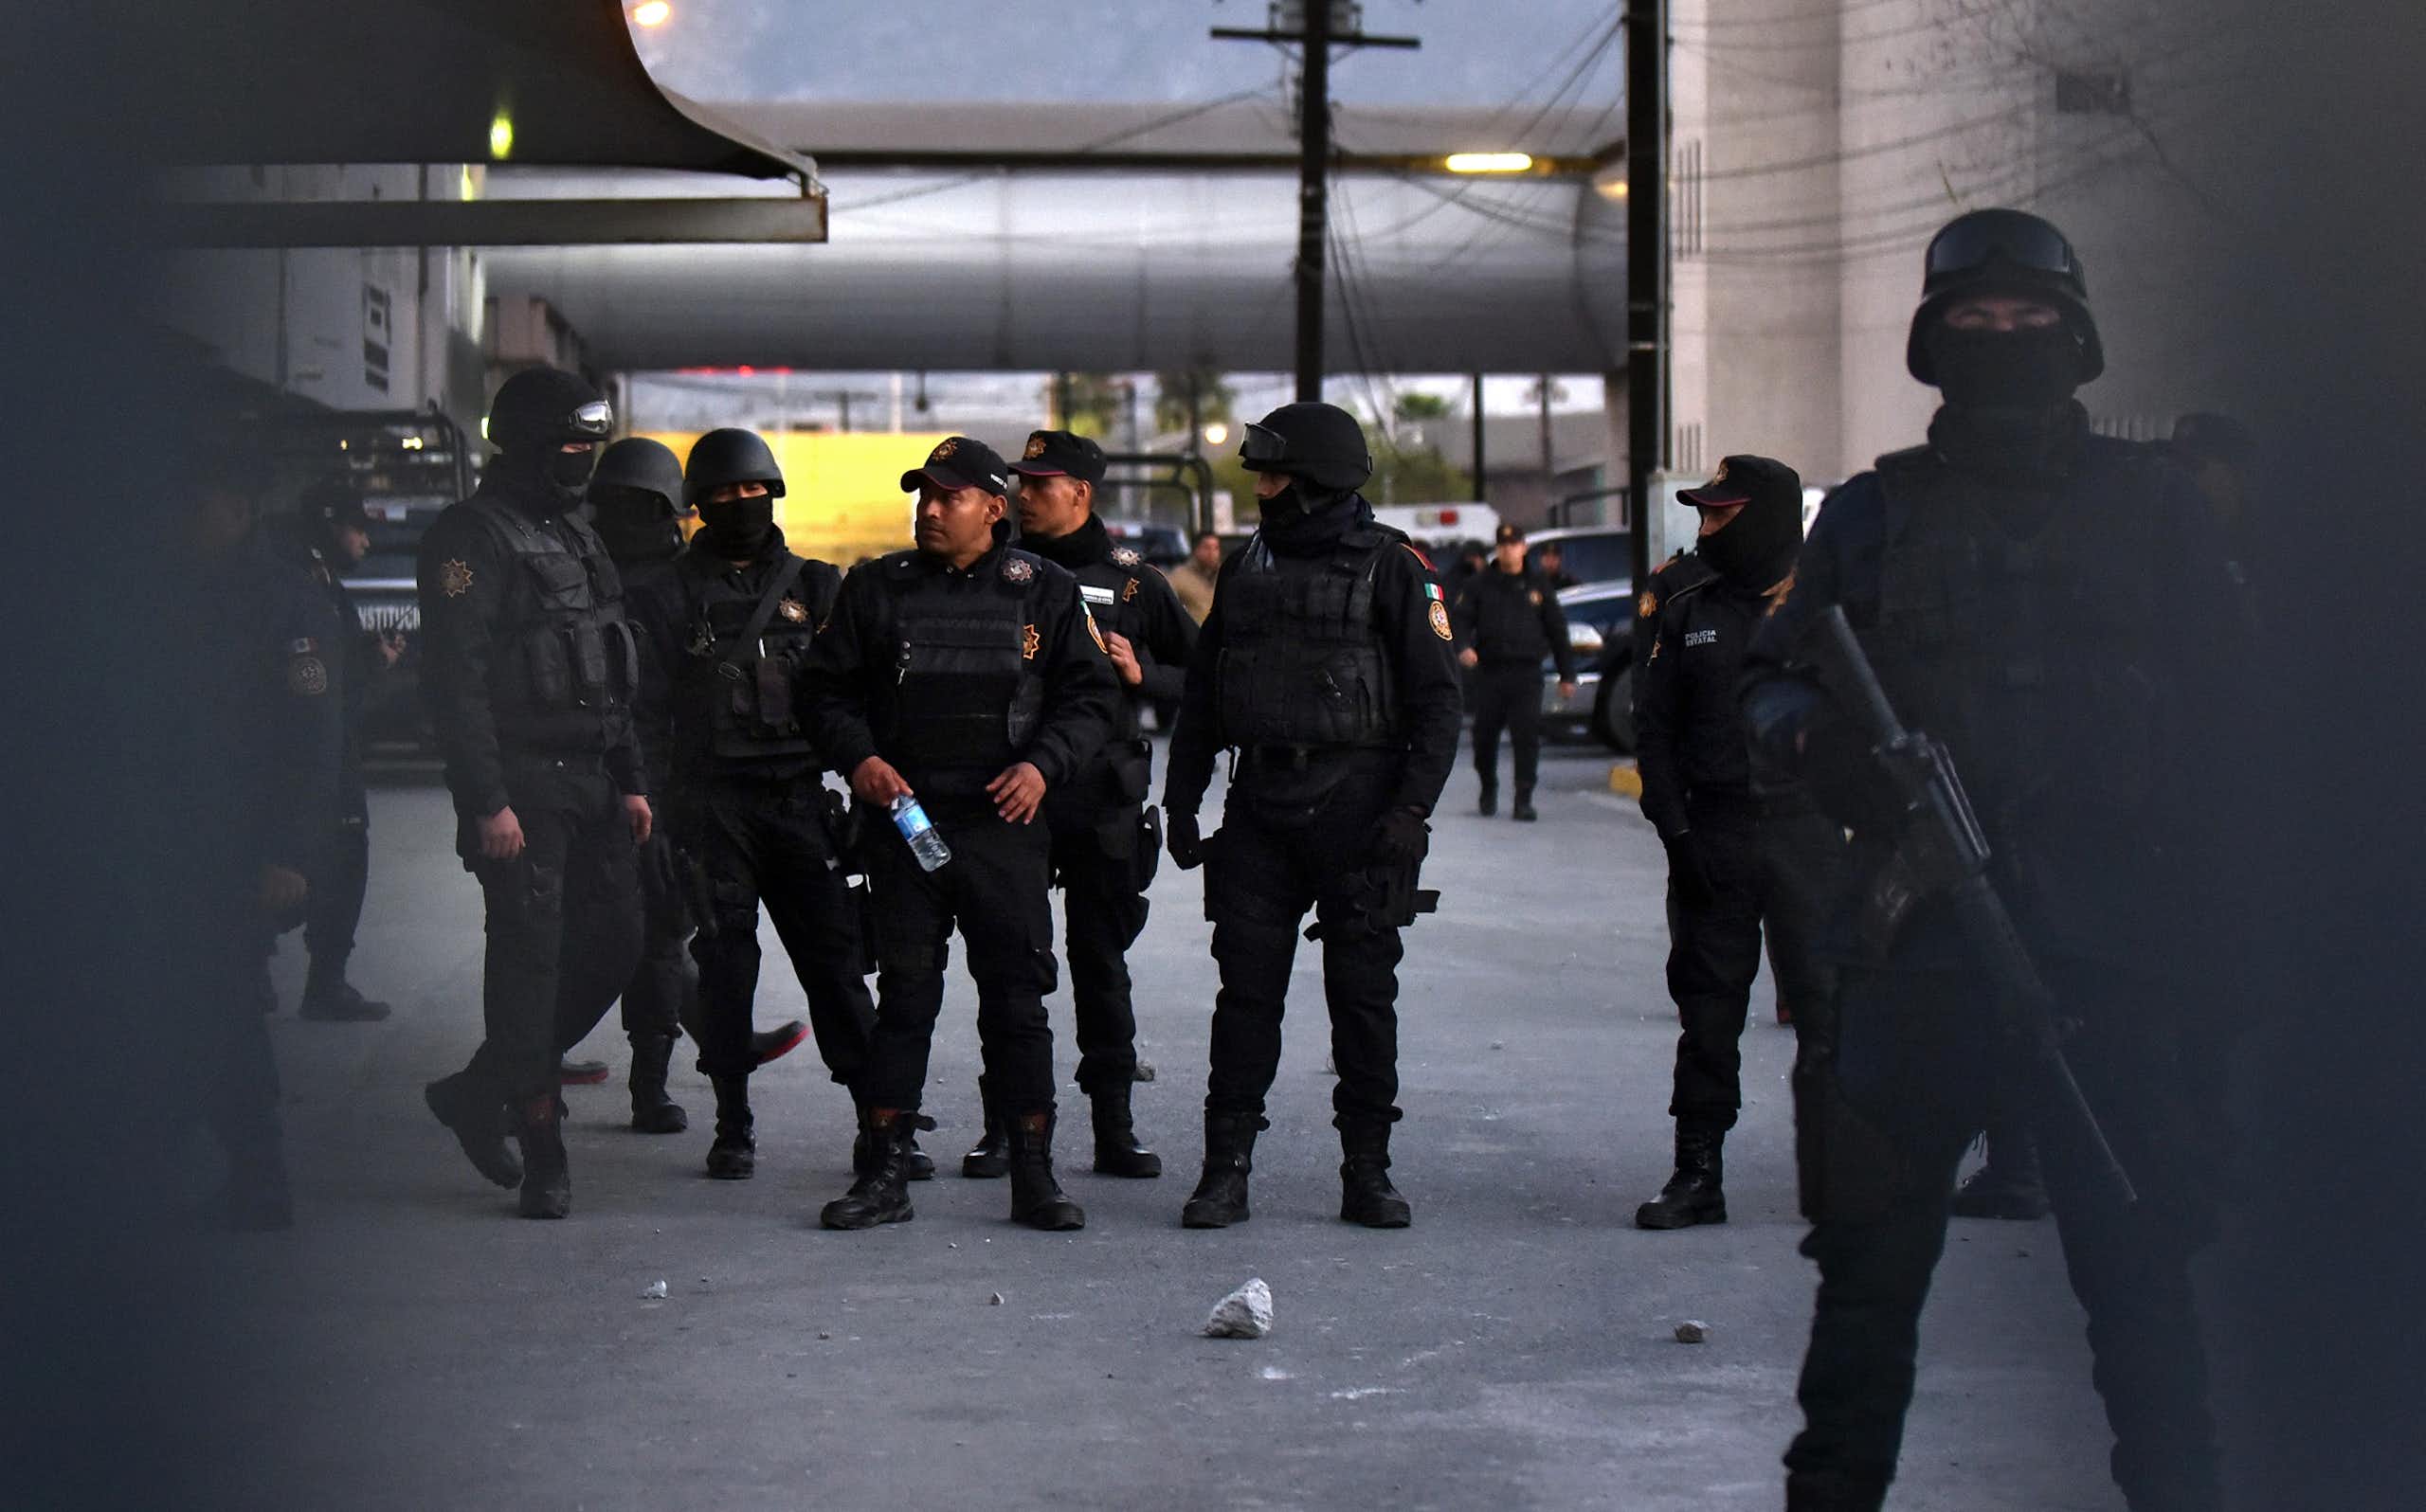 Armed Mexican policemen standing in a group in a car park.